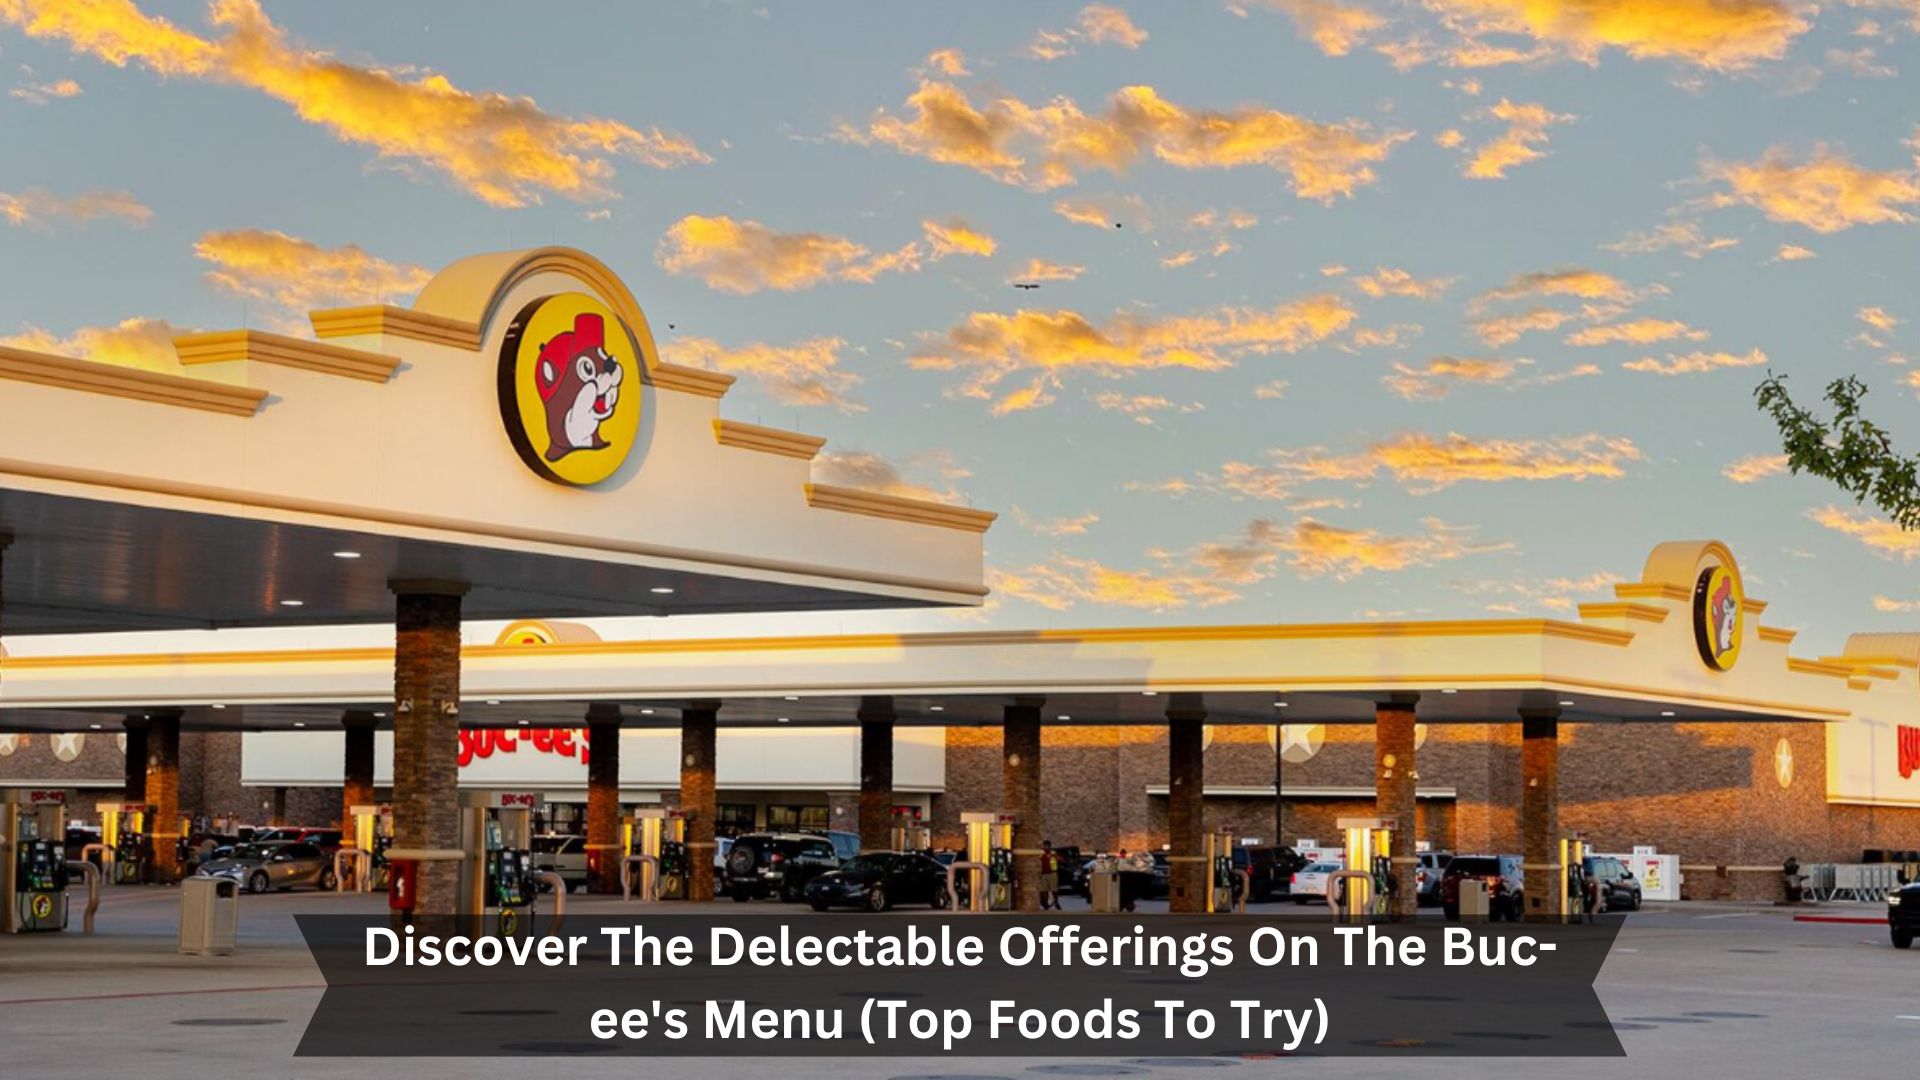 Discover-The-Delectable-Offerings-On-The-Buc-ees-Menu-Top-Foods-To-Try